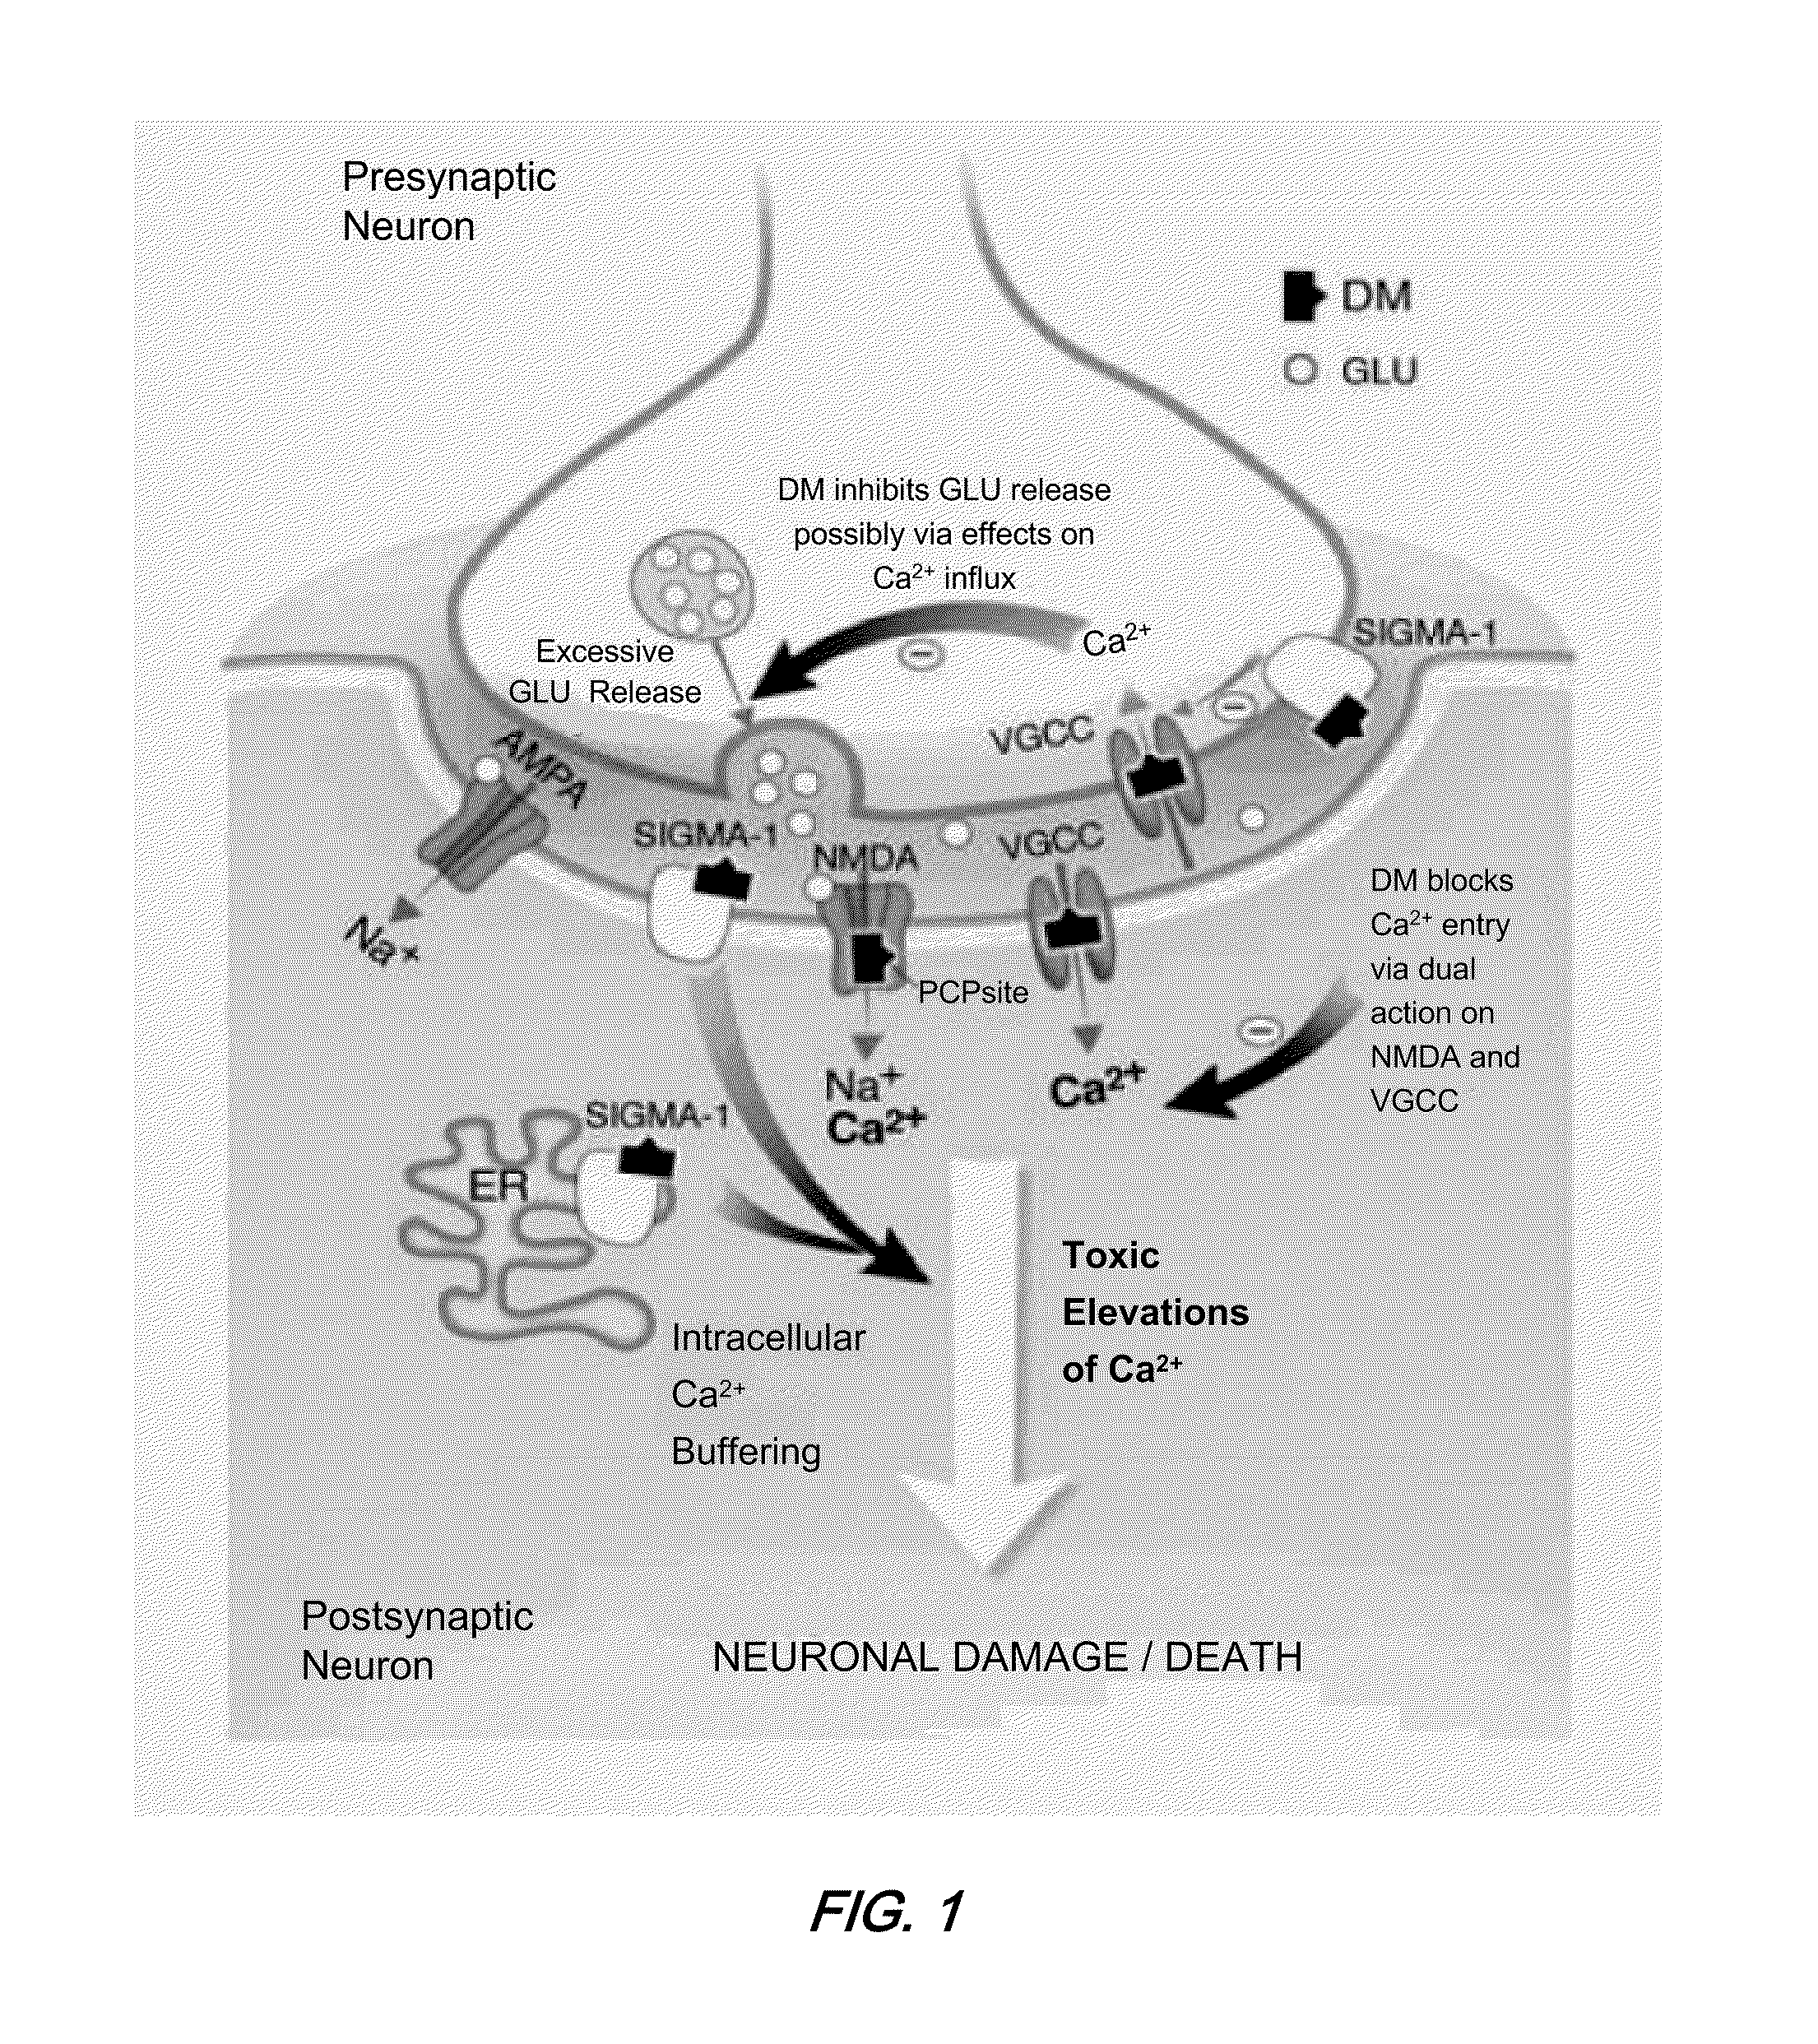 Pharmaceutical Compositions Comprising Dextromethorphan and Quinidine for the Treatment of Depression, Anxiety, and Neurodegenerative Disorders